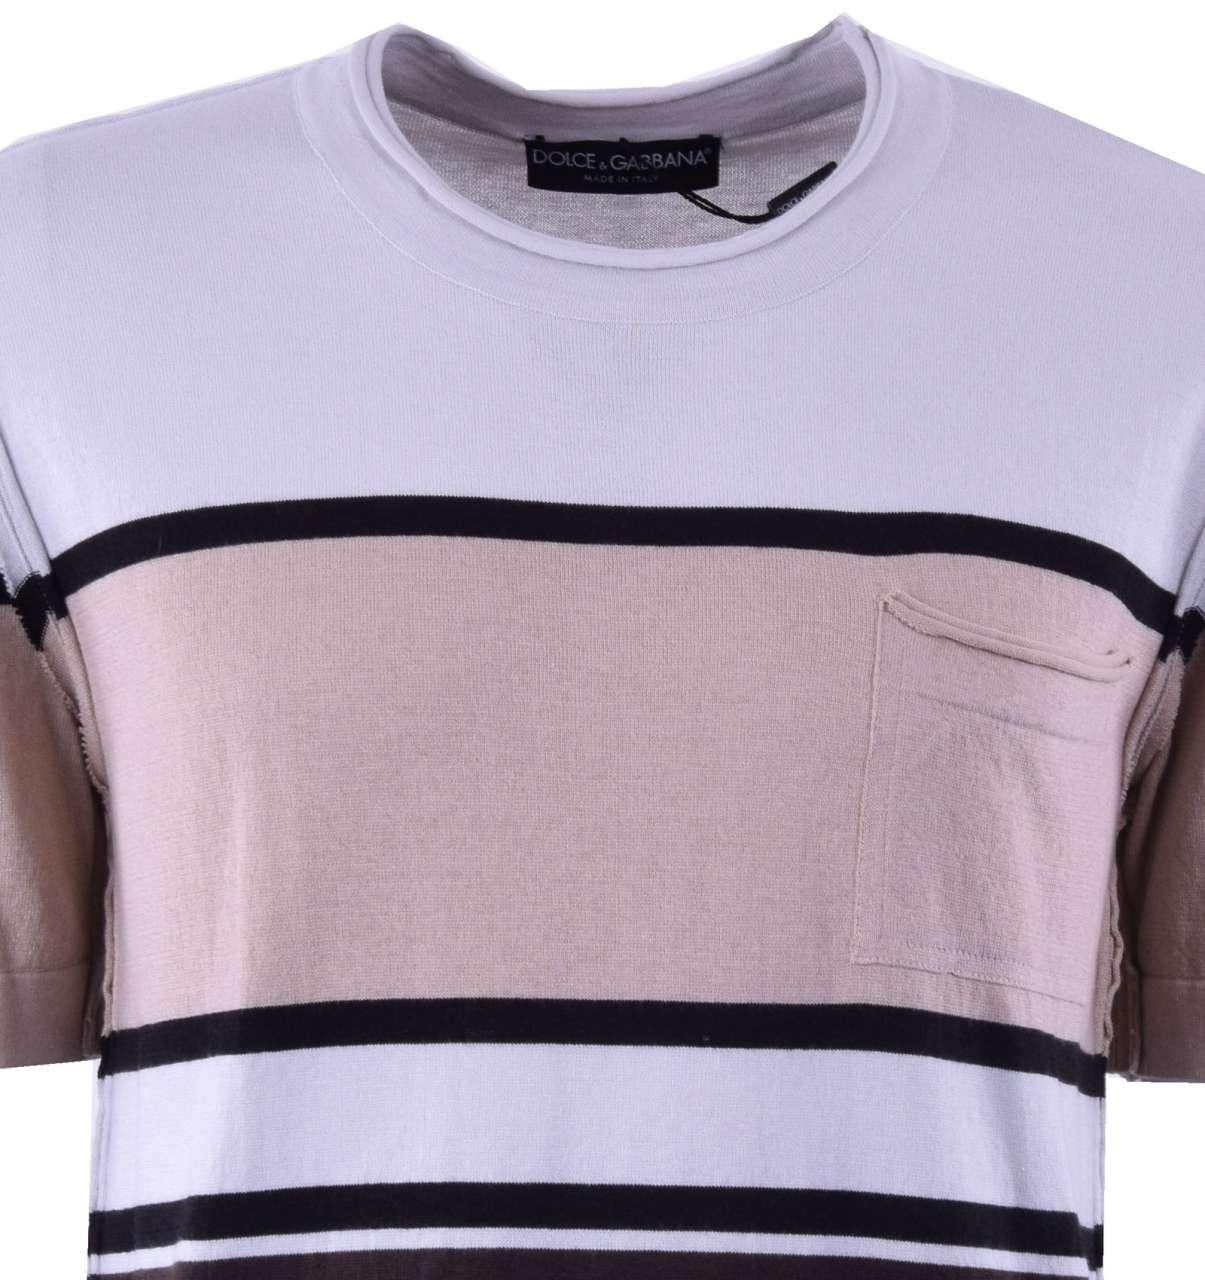 Dolce & Gabbana - Knitted Cotton Cashmere T-Shirt with Stripes Brown Beige 44 In Excellent Condition For Sale In Erkrath, DE